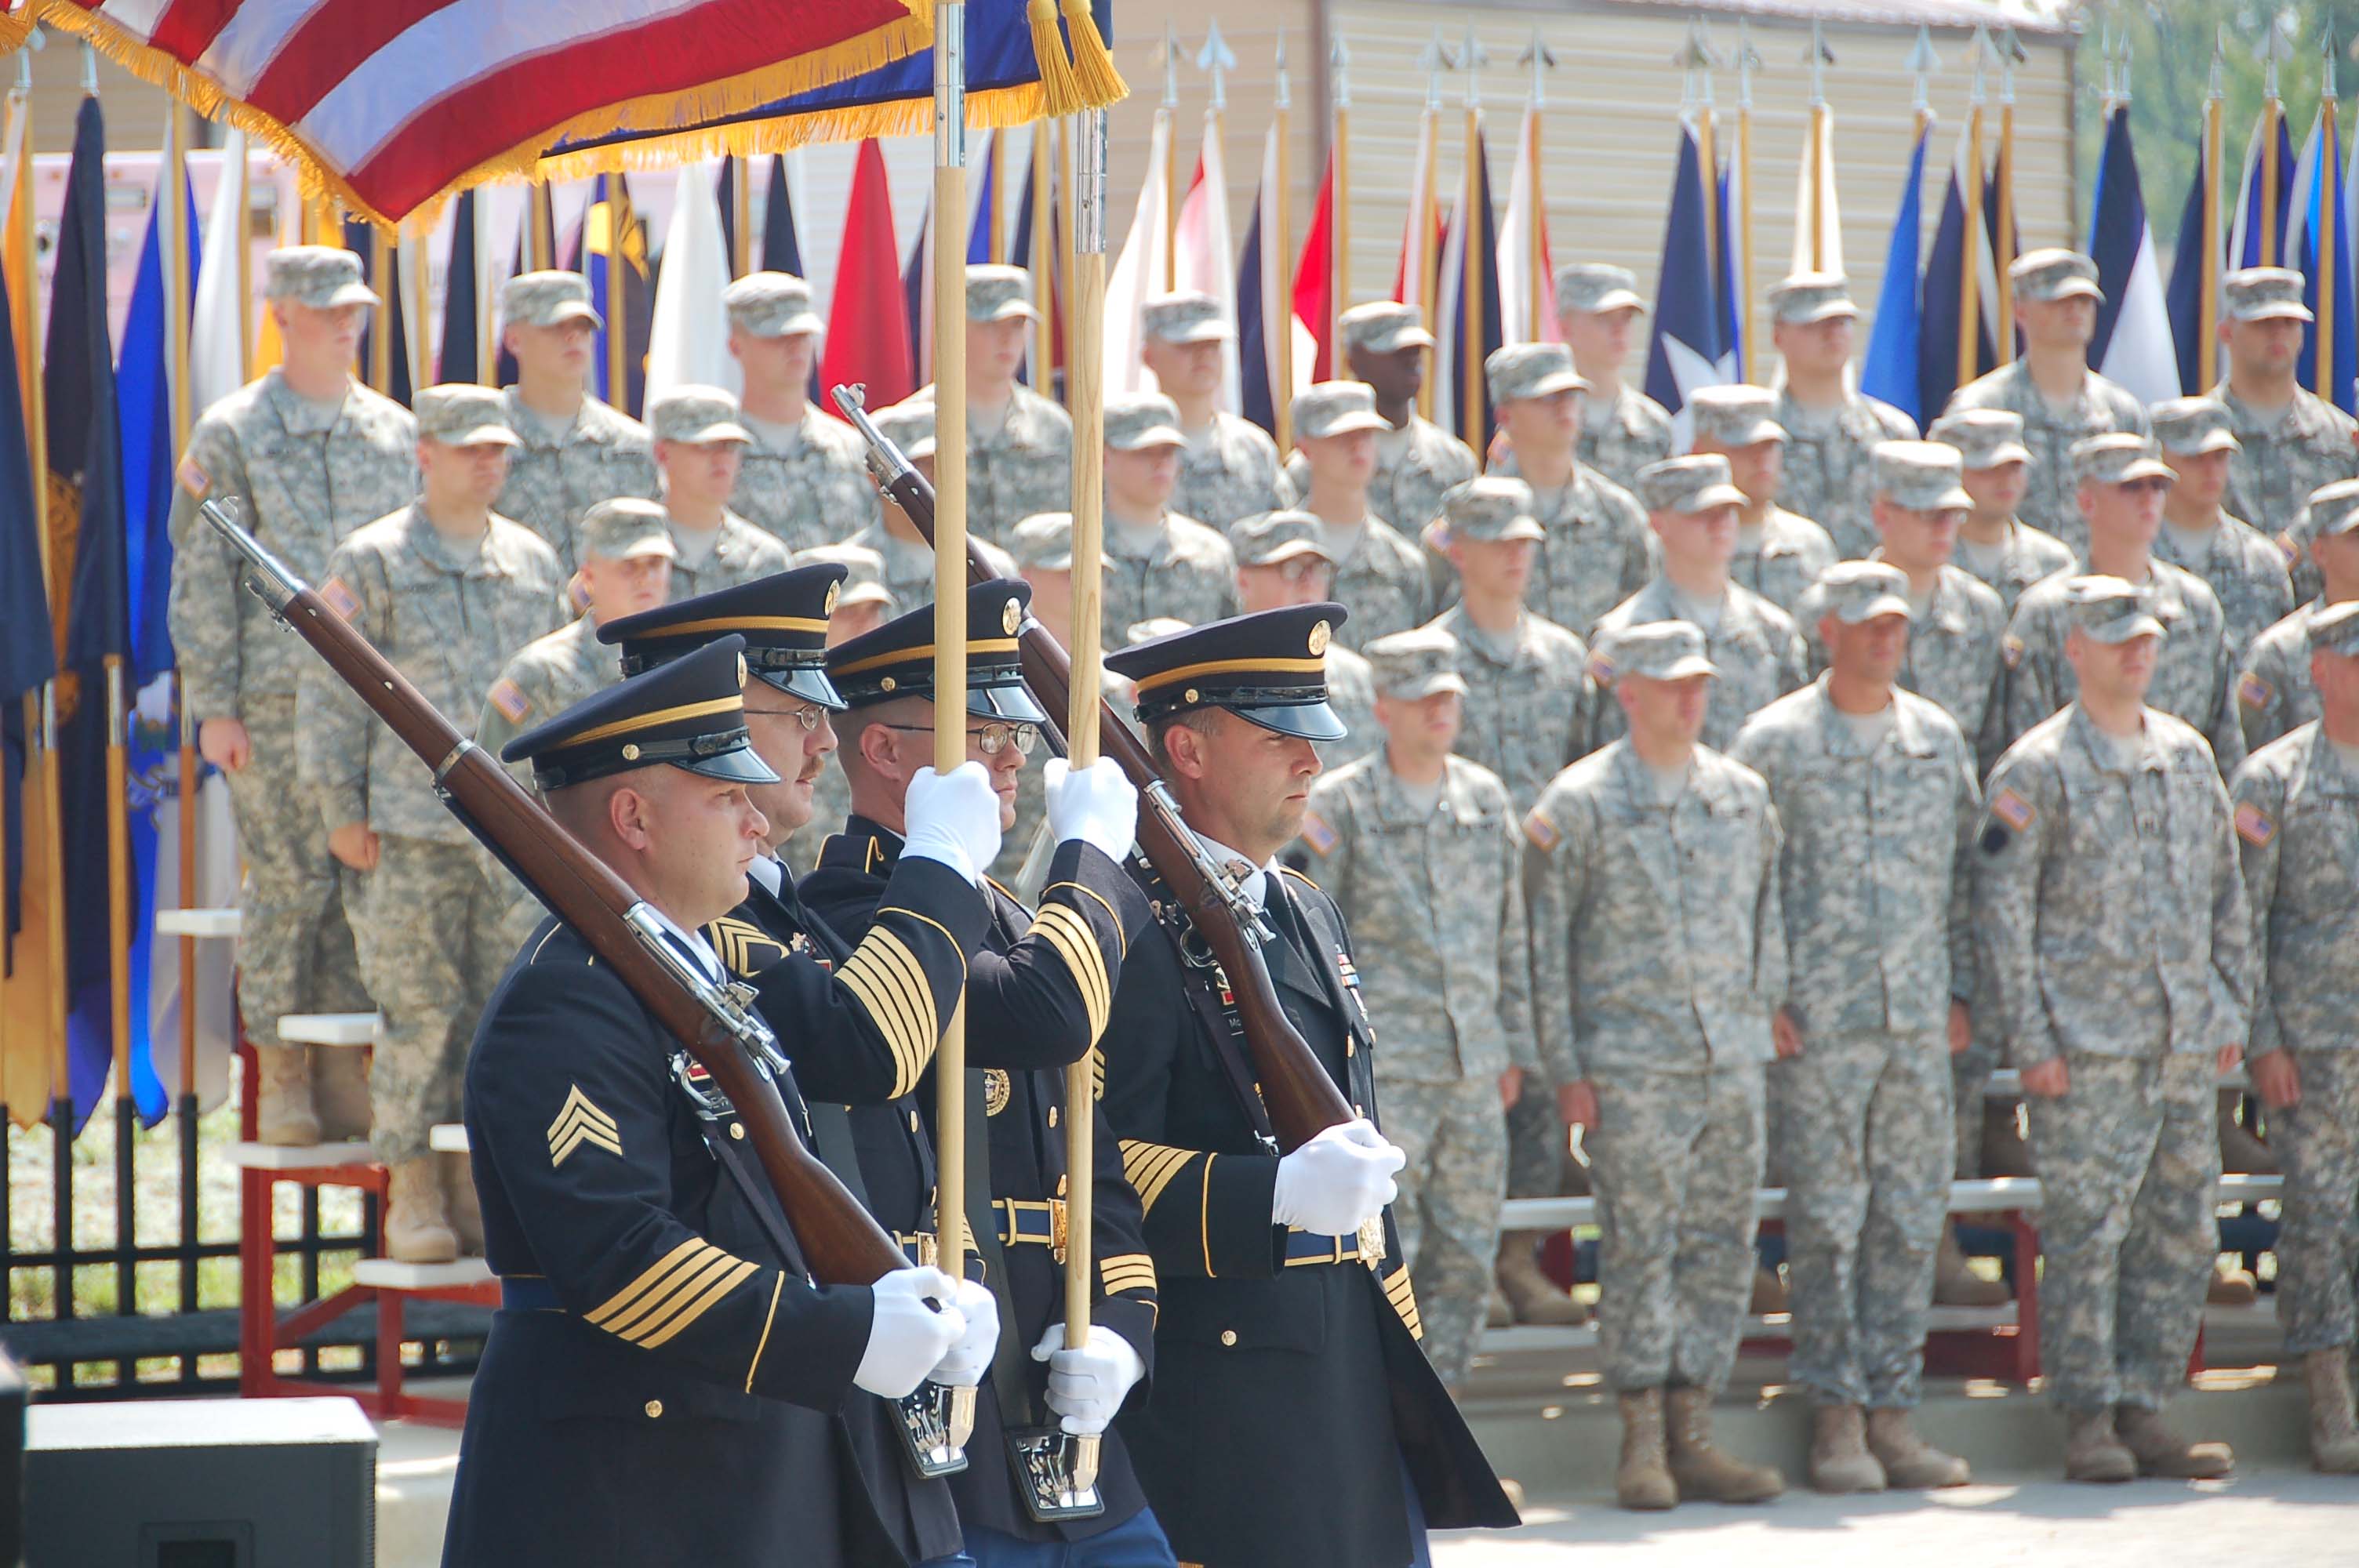 File:Flickr - The U.S. Army - Indiana National Guard Honor Guard.jpg ...